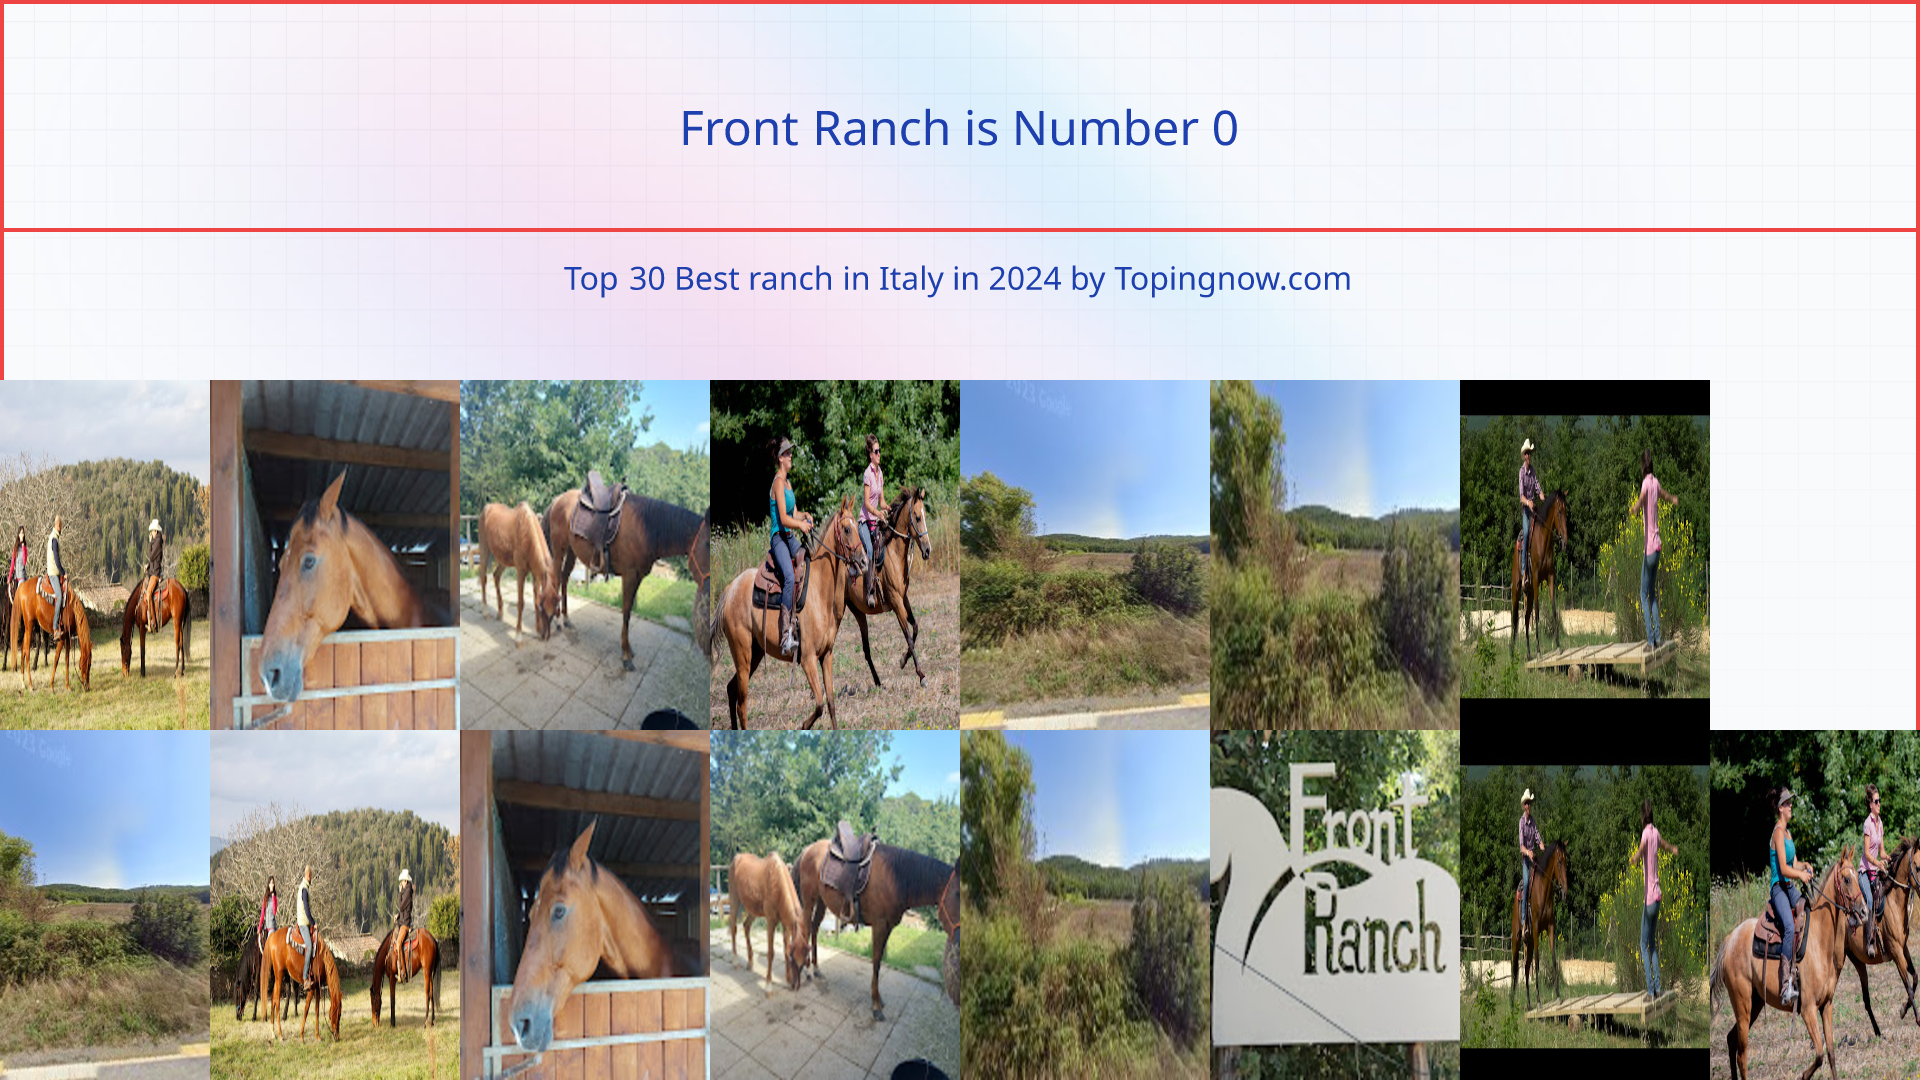 Front Ranch: Top 30 Best ranch in Italy in 2024